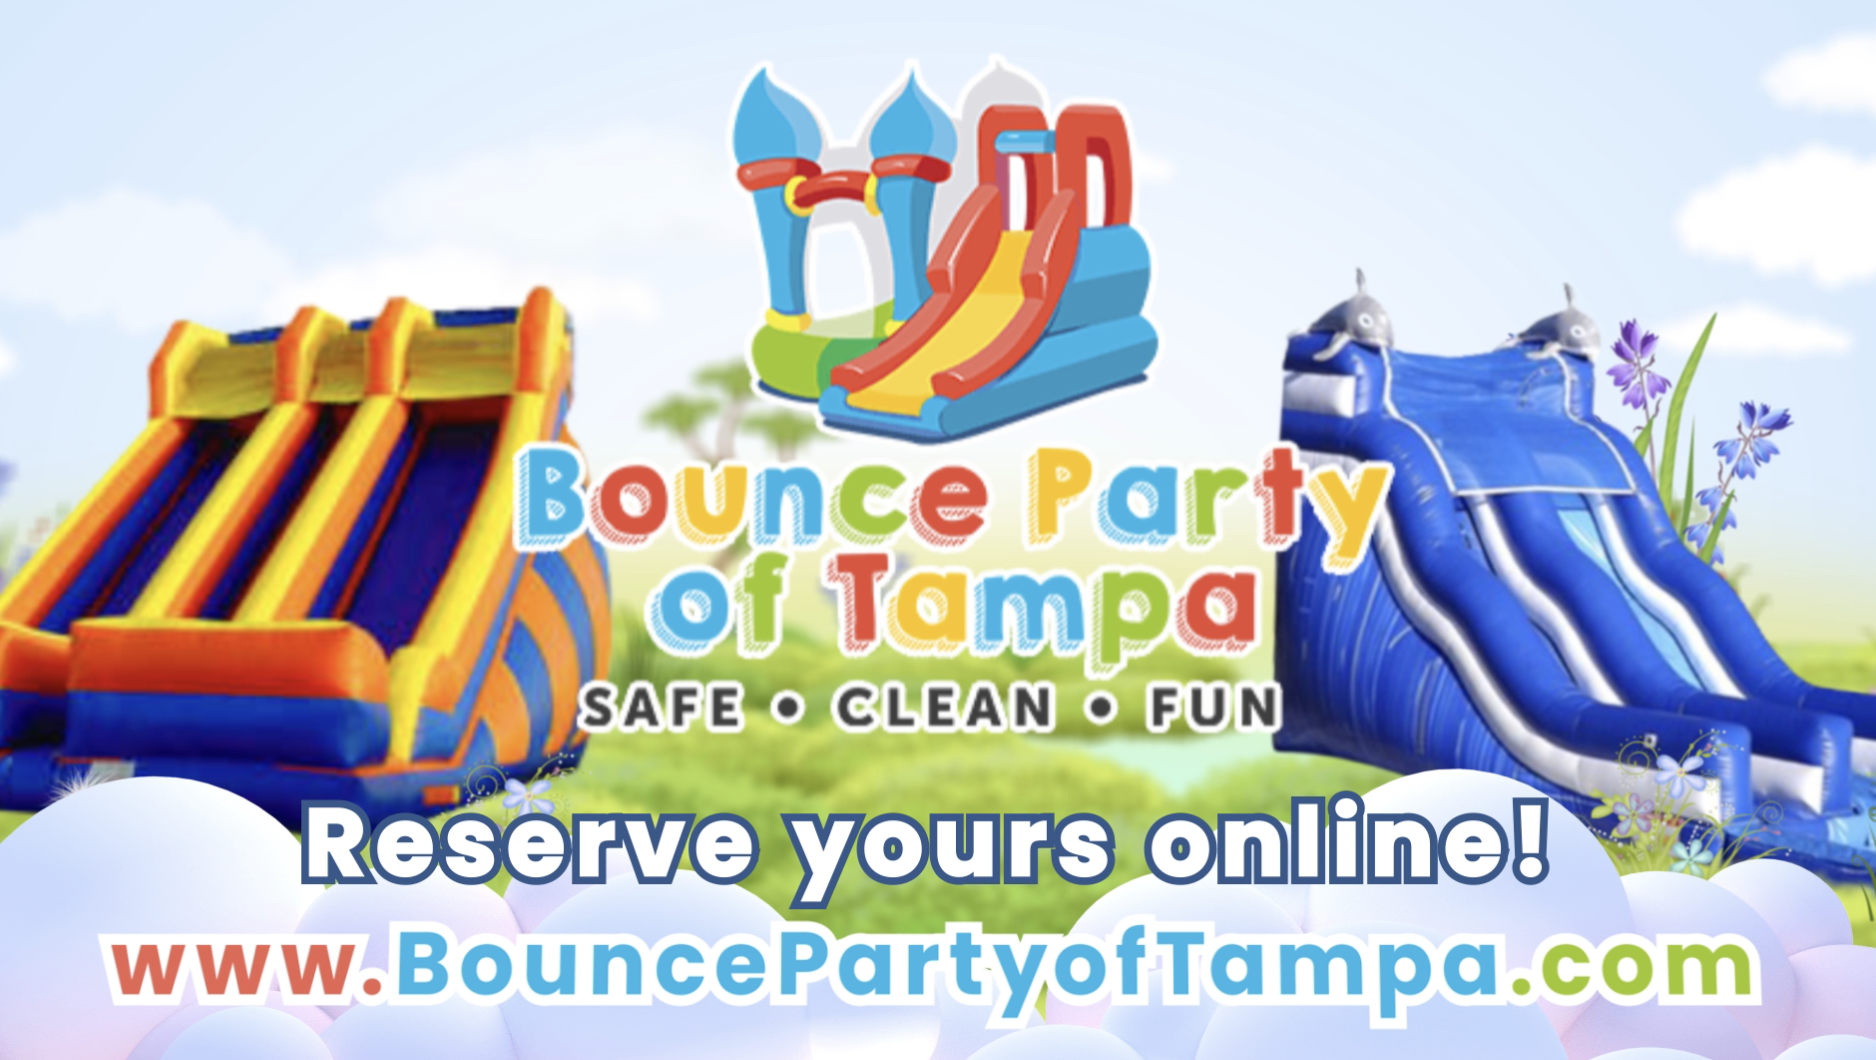 Party rental – Water slides, bounce houses, table and chairs and more